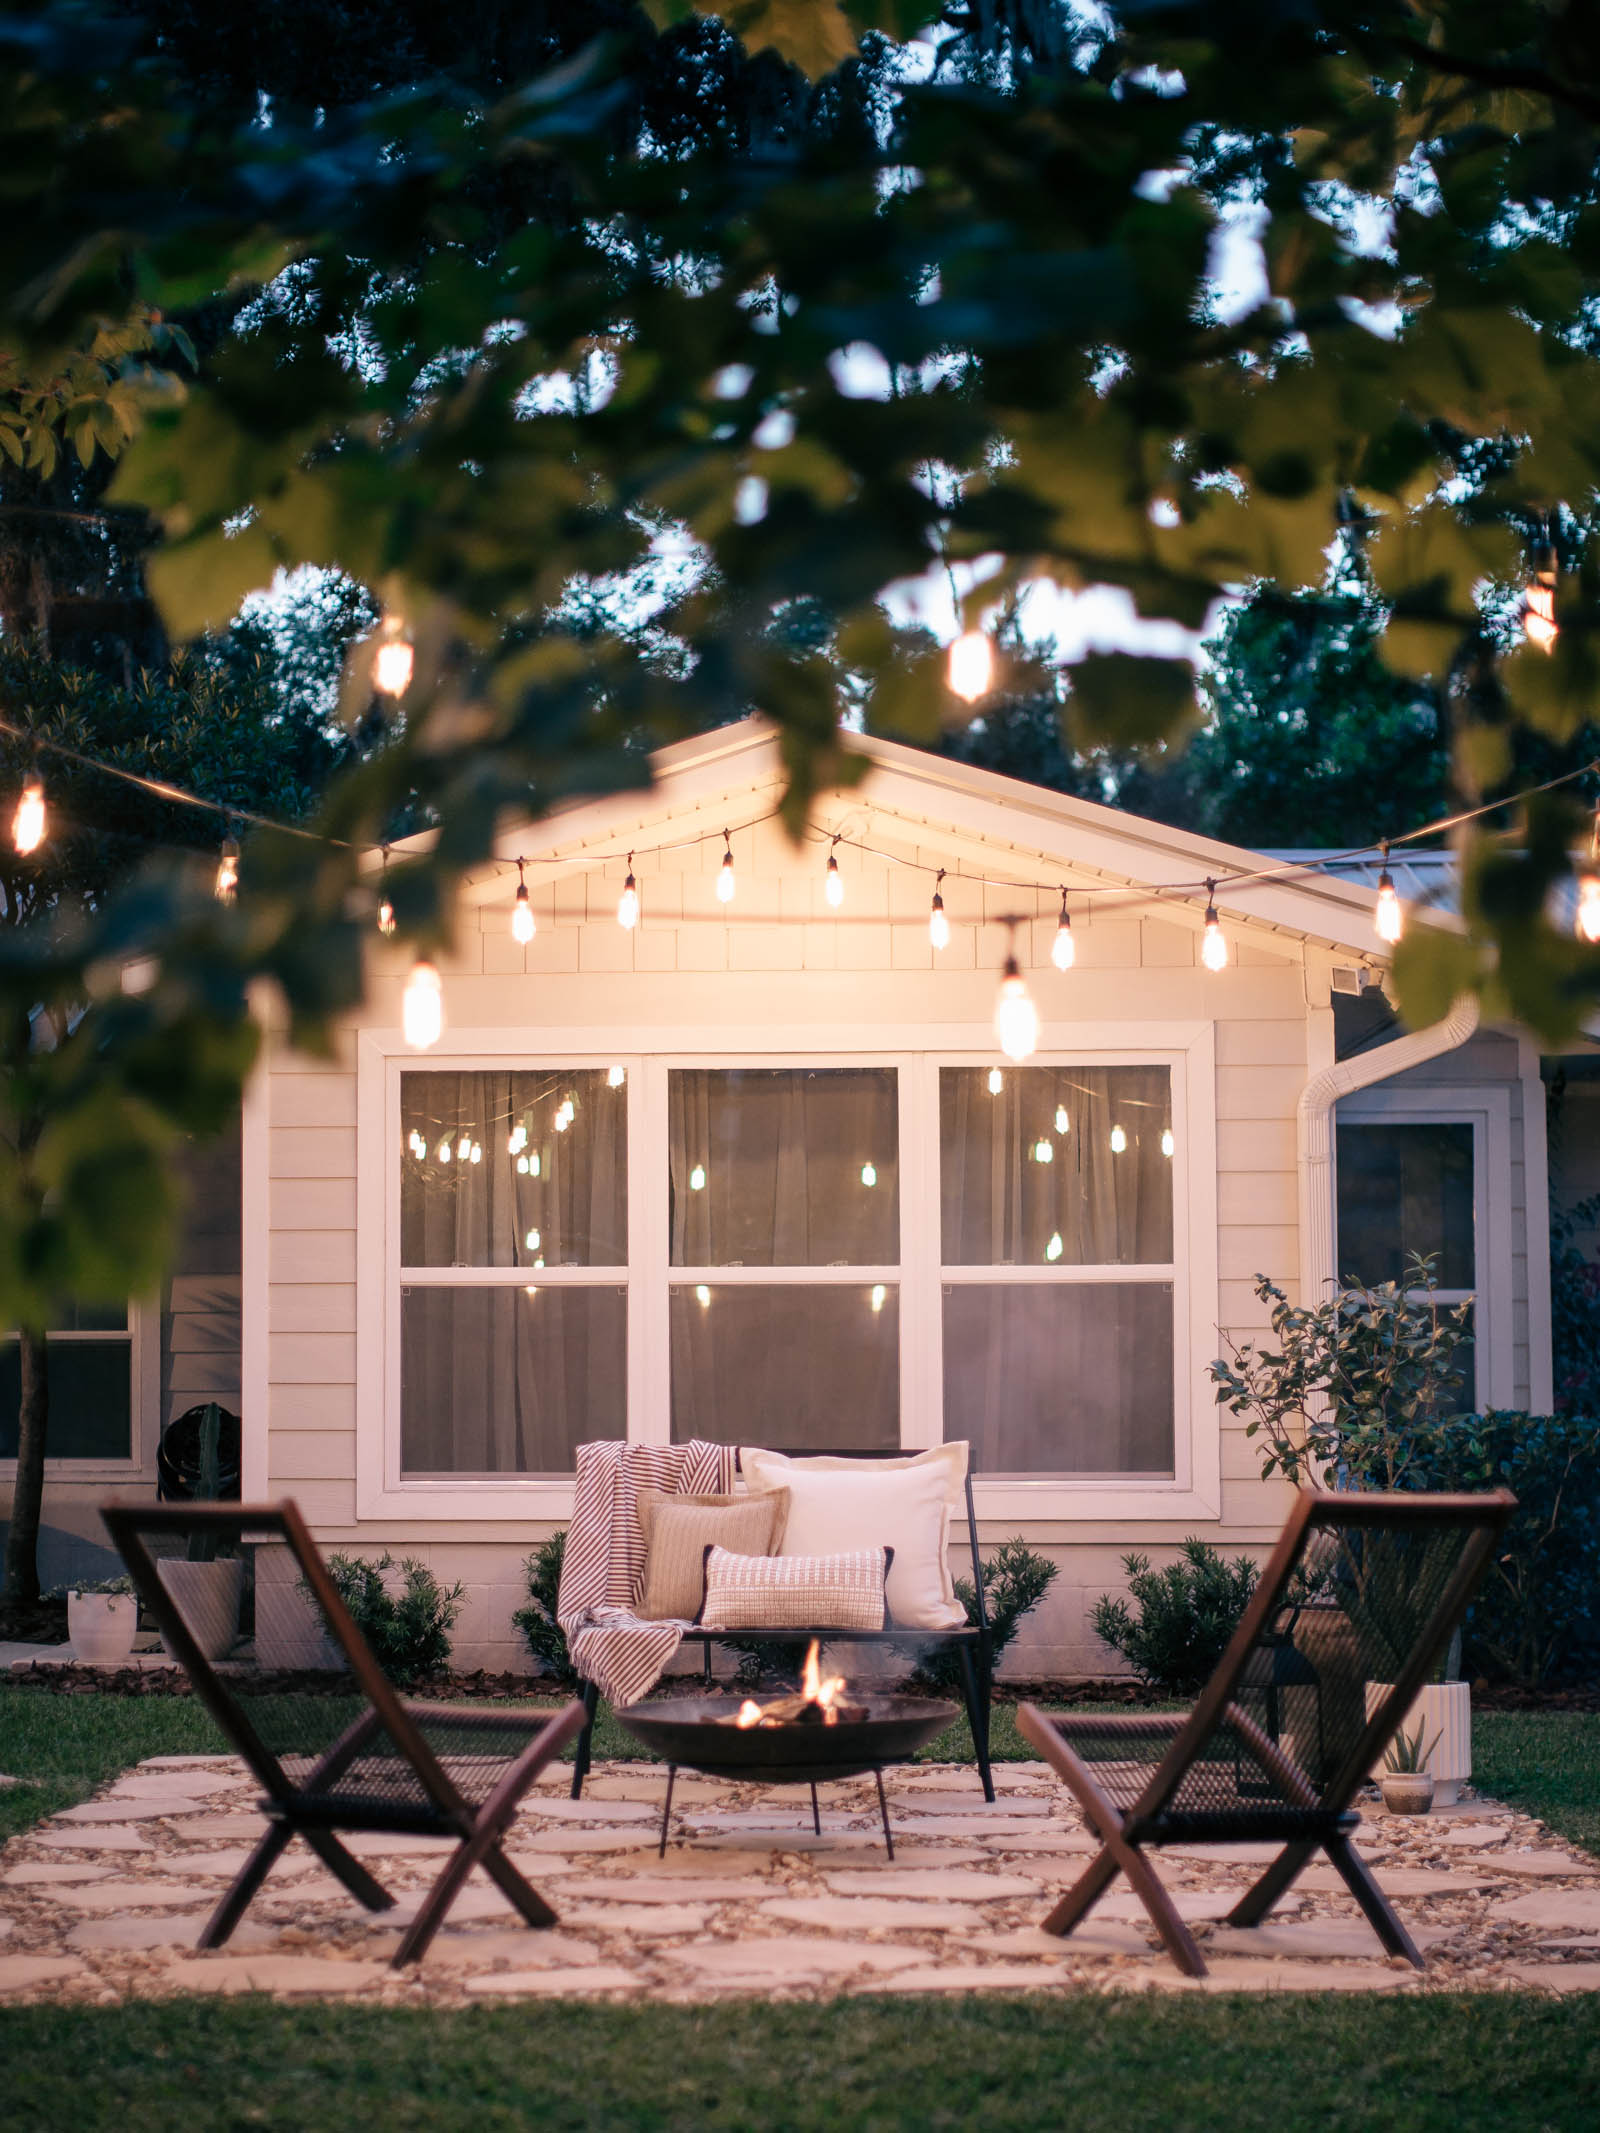 DIY Fire Pit with String Lights